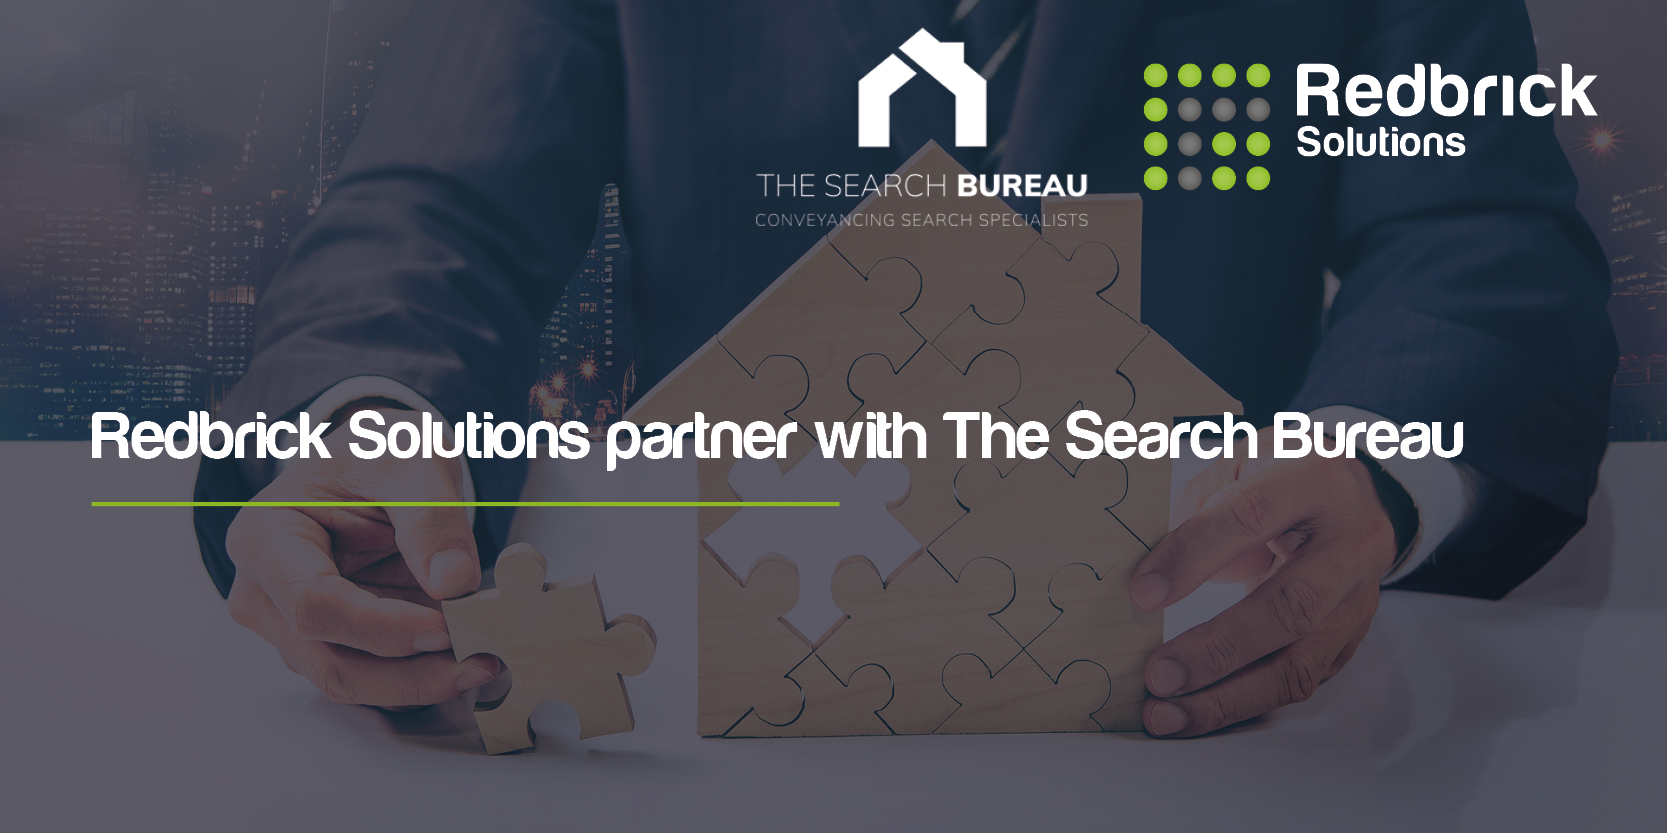 Redbrick Solutions partner with The Search Bureau